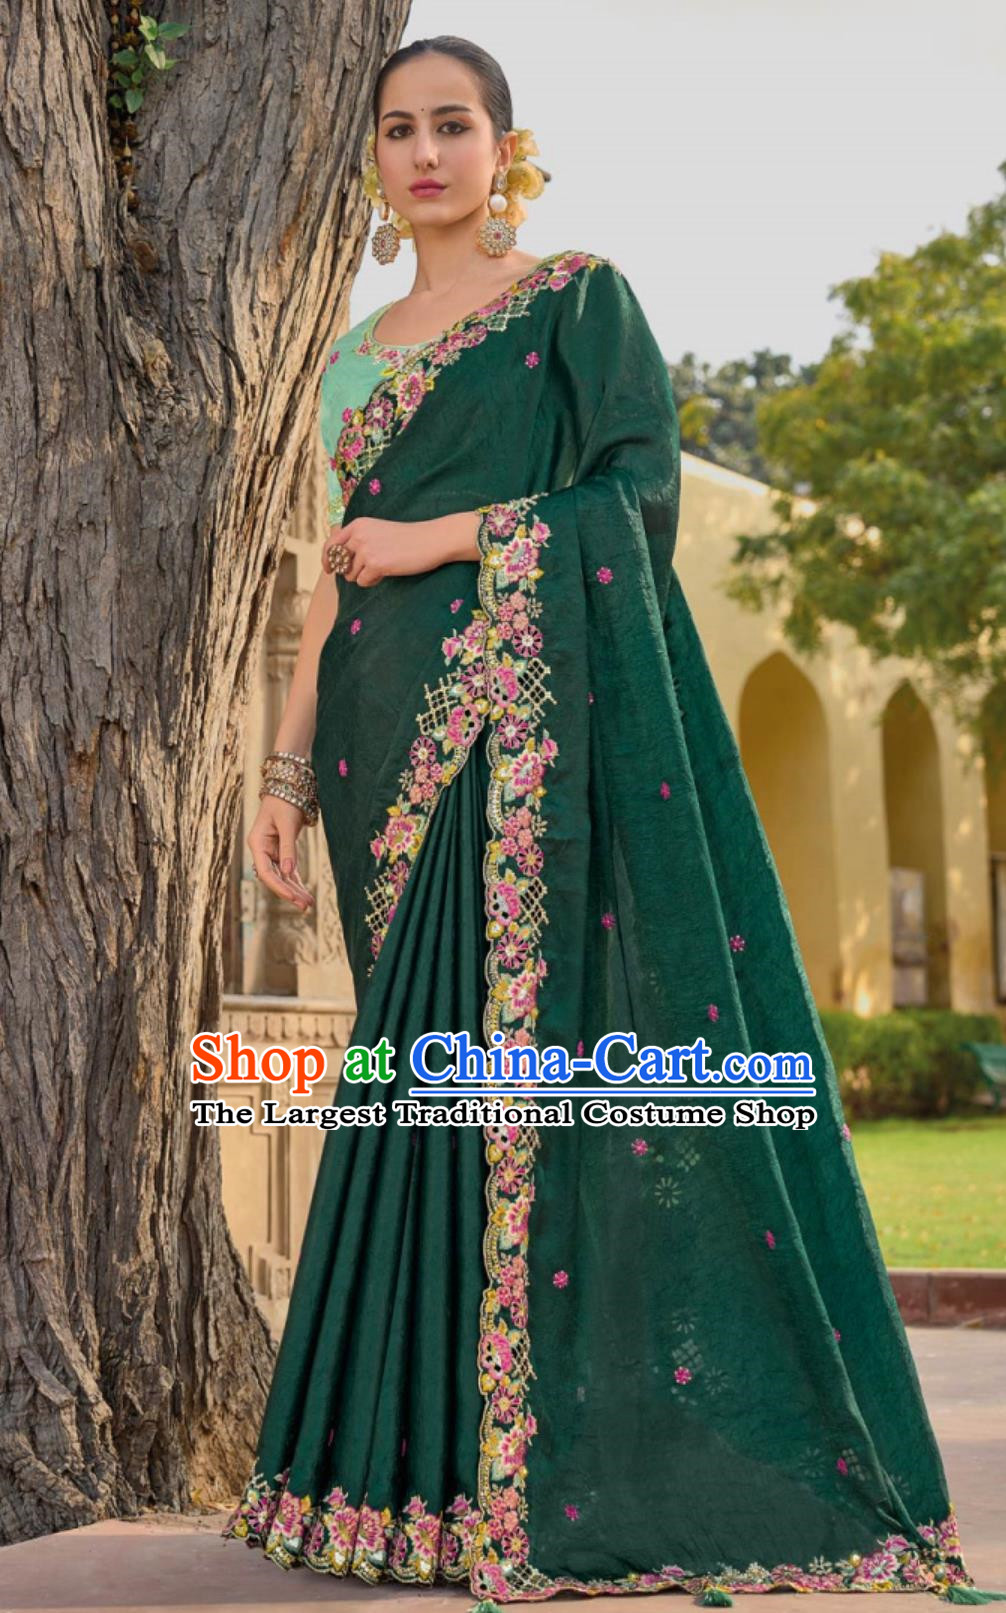 India National Clothing Traditional Festival Fashion Indian Women Embroidered Dark Green Sari Dress